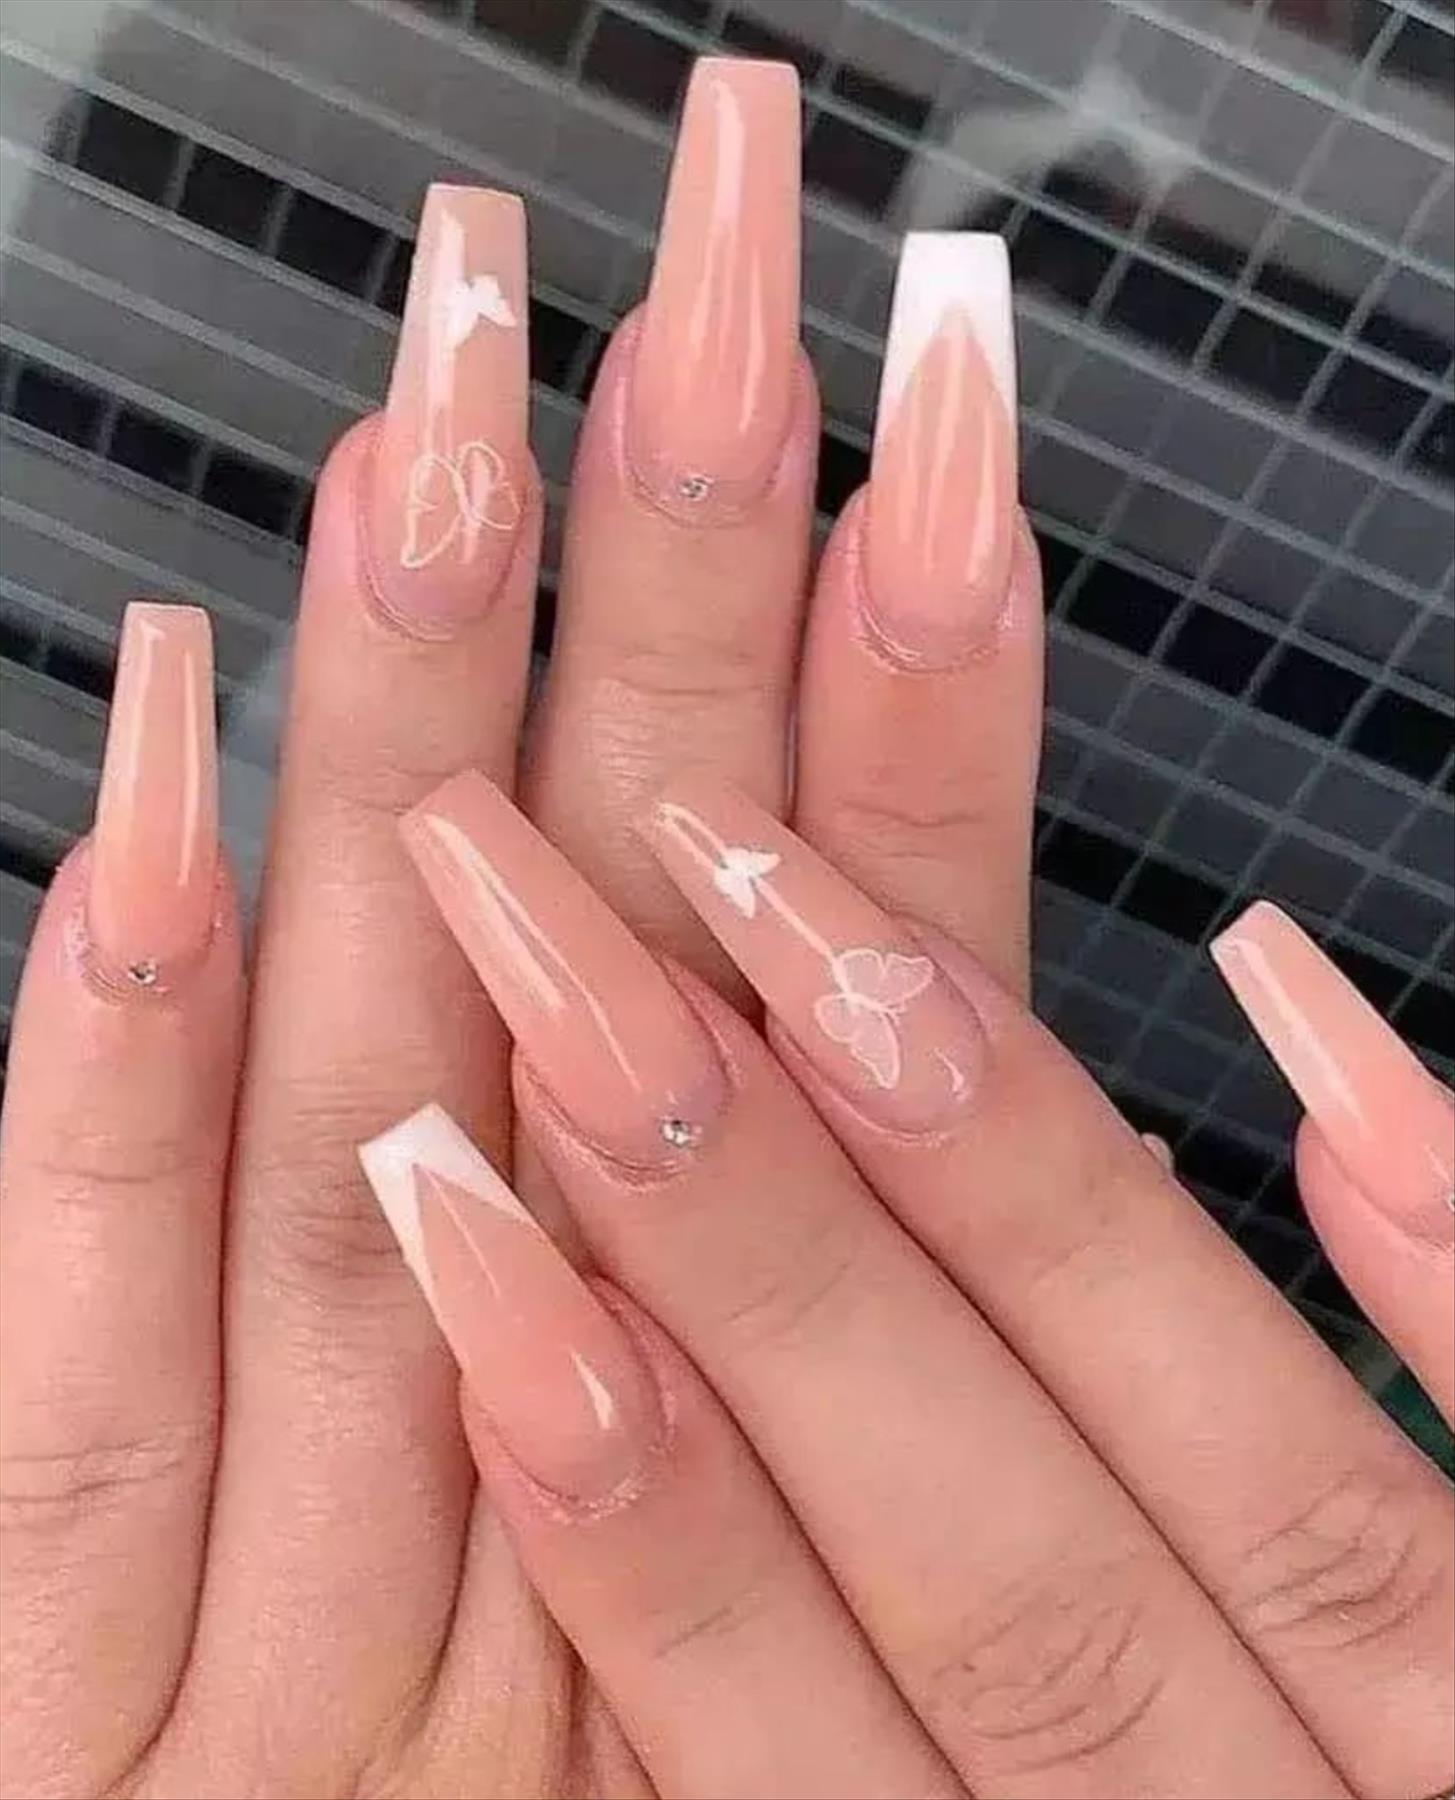 Elegant French Tip Coffin Nails You'll Love in Summer